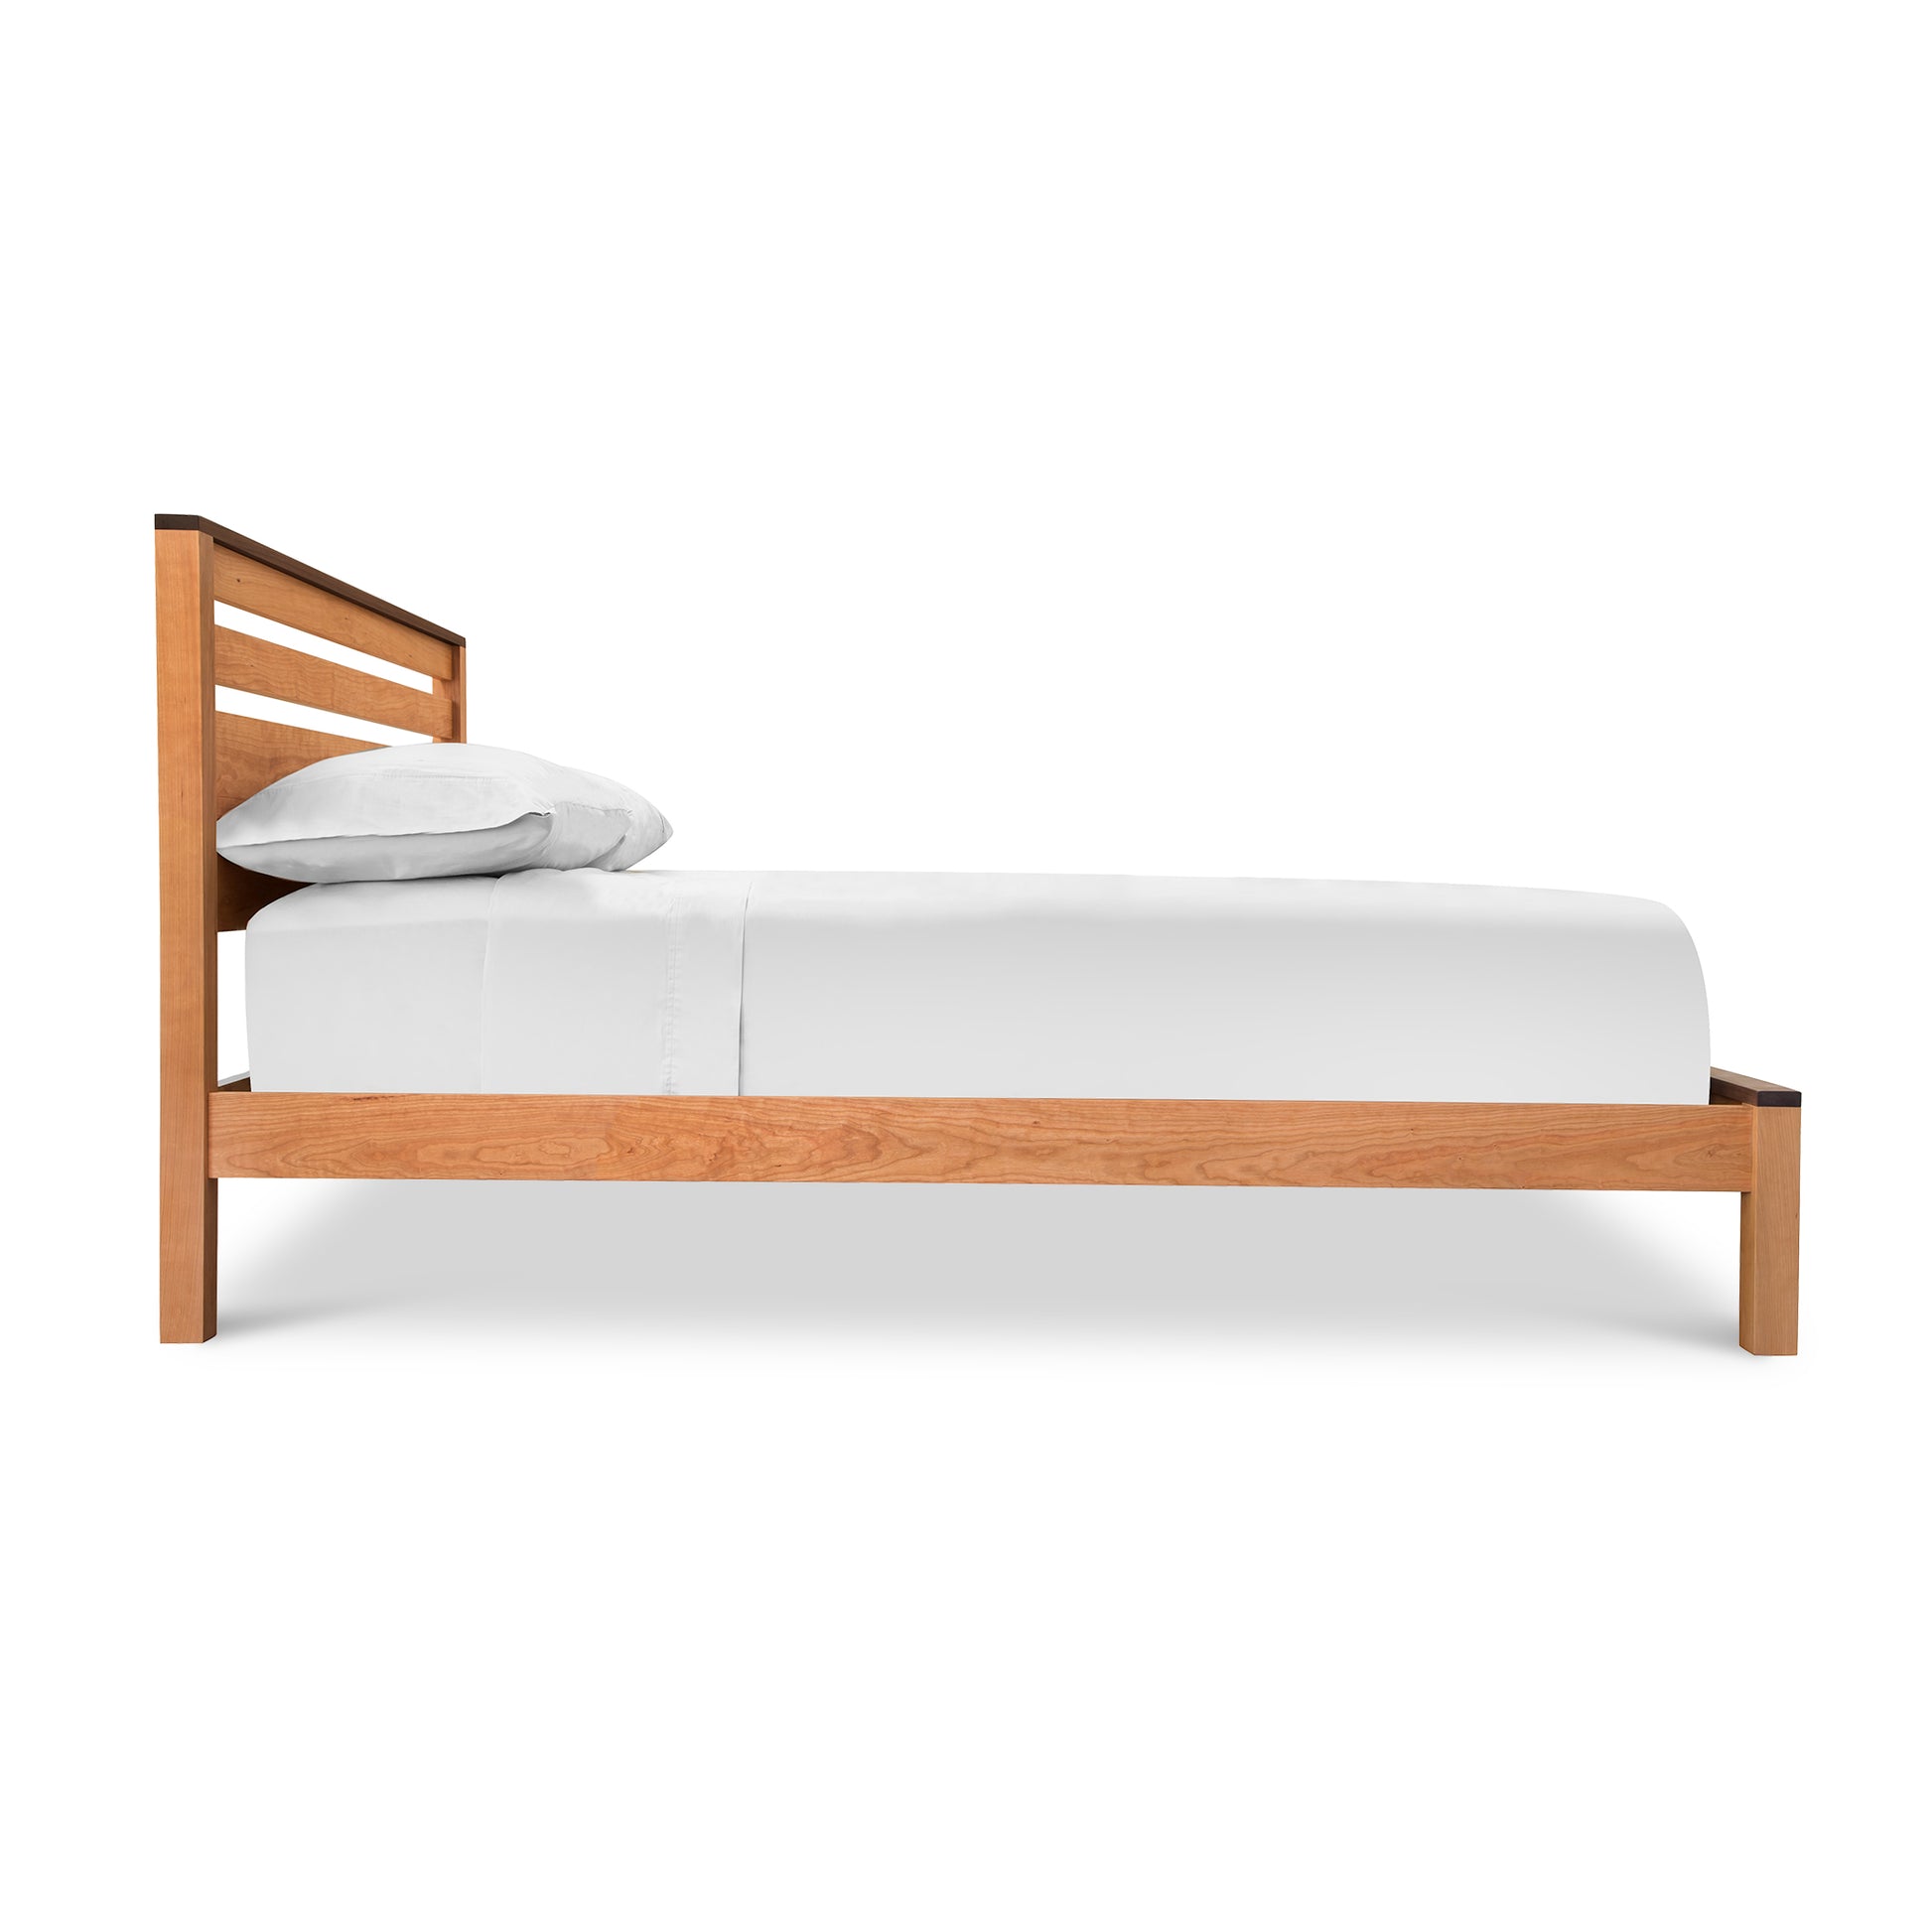 The Vermont Furniture Designs Skyline Panel Bed is a handmade-to-order bed with a wooden frame crafted from natural eco-friendly materials. It features white sheets and is finished with a hand-rubbed oil finish.